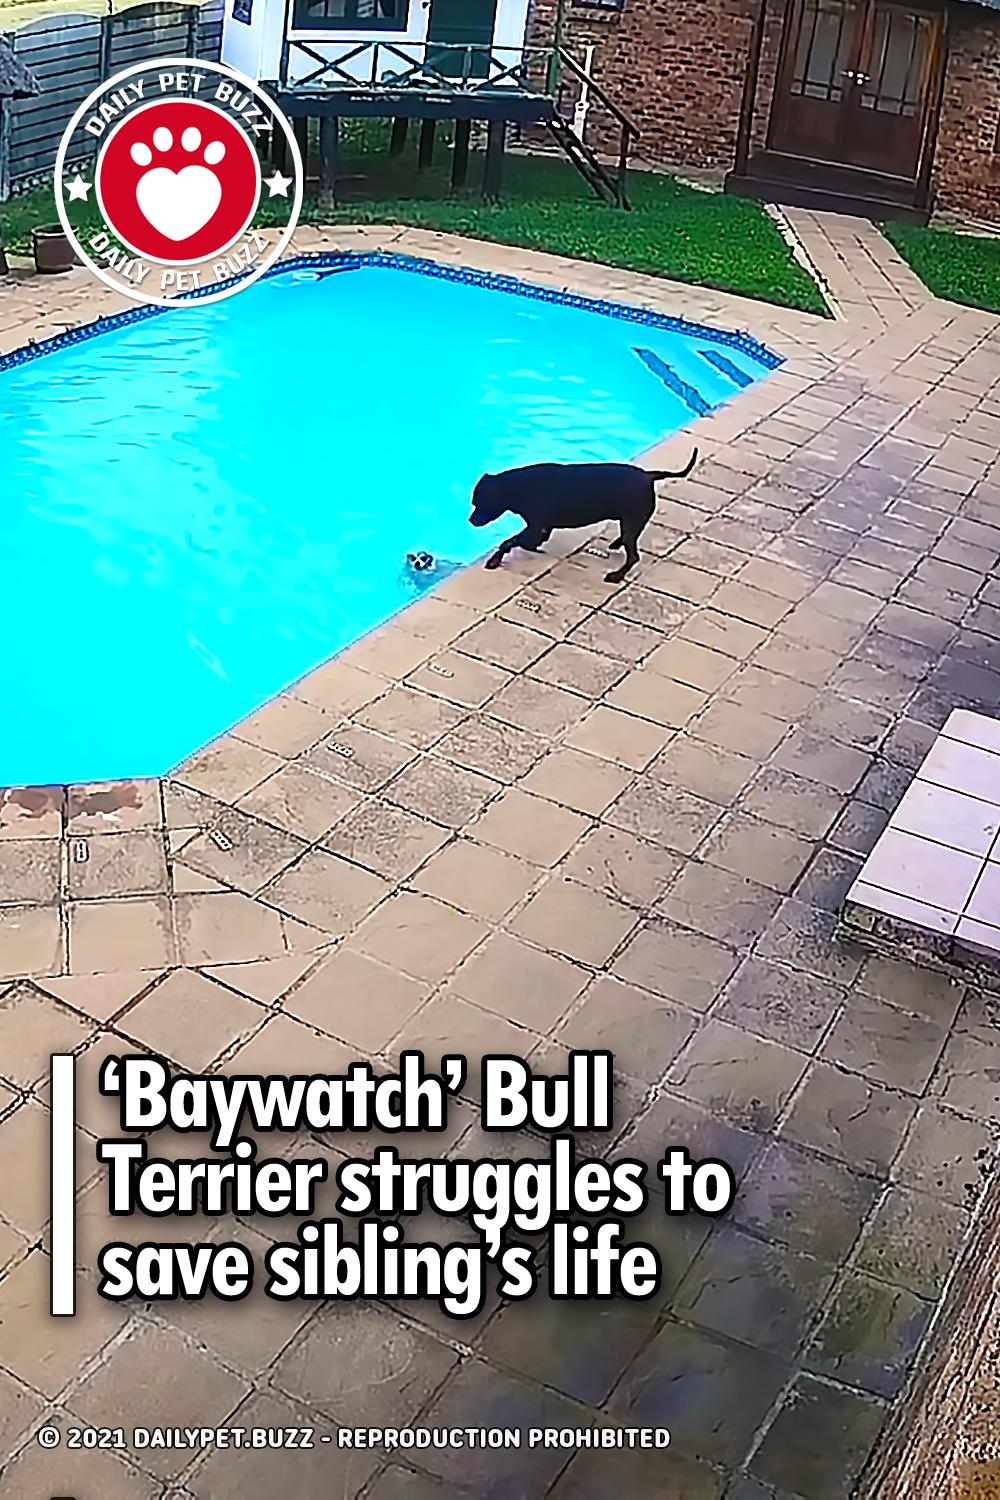 ‘Baywatch’ Bull Terrier struggles to save sibling’s life